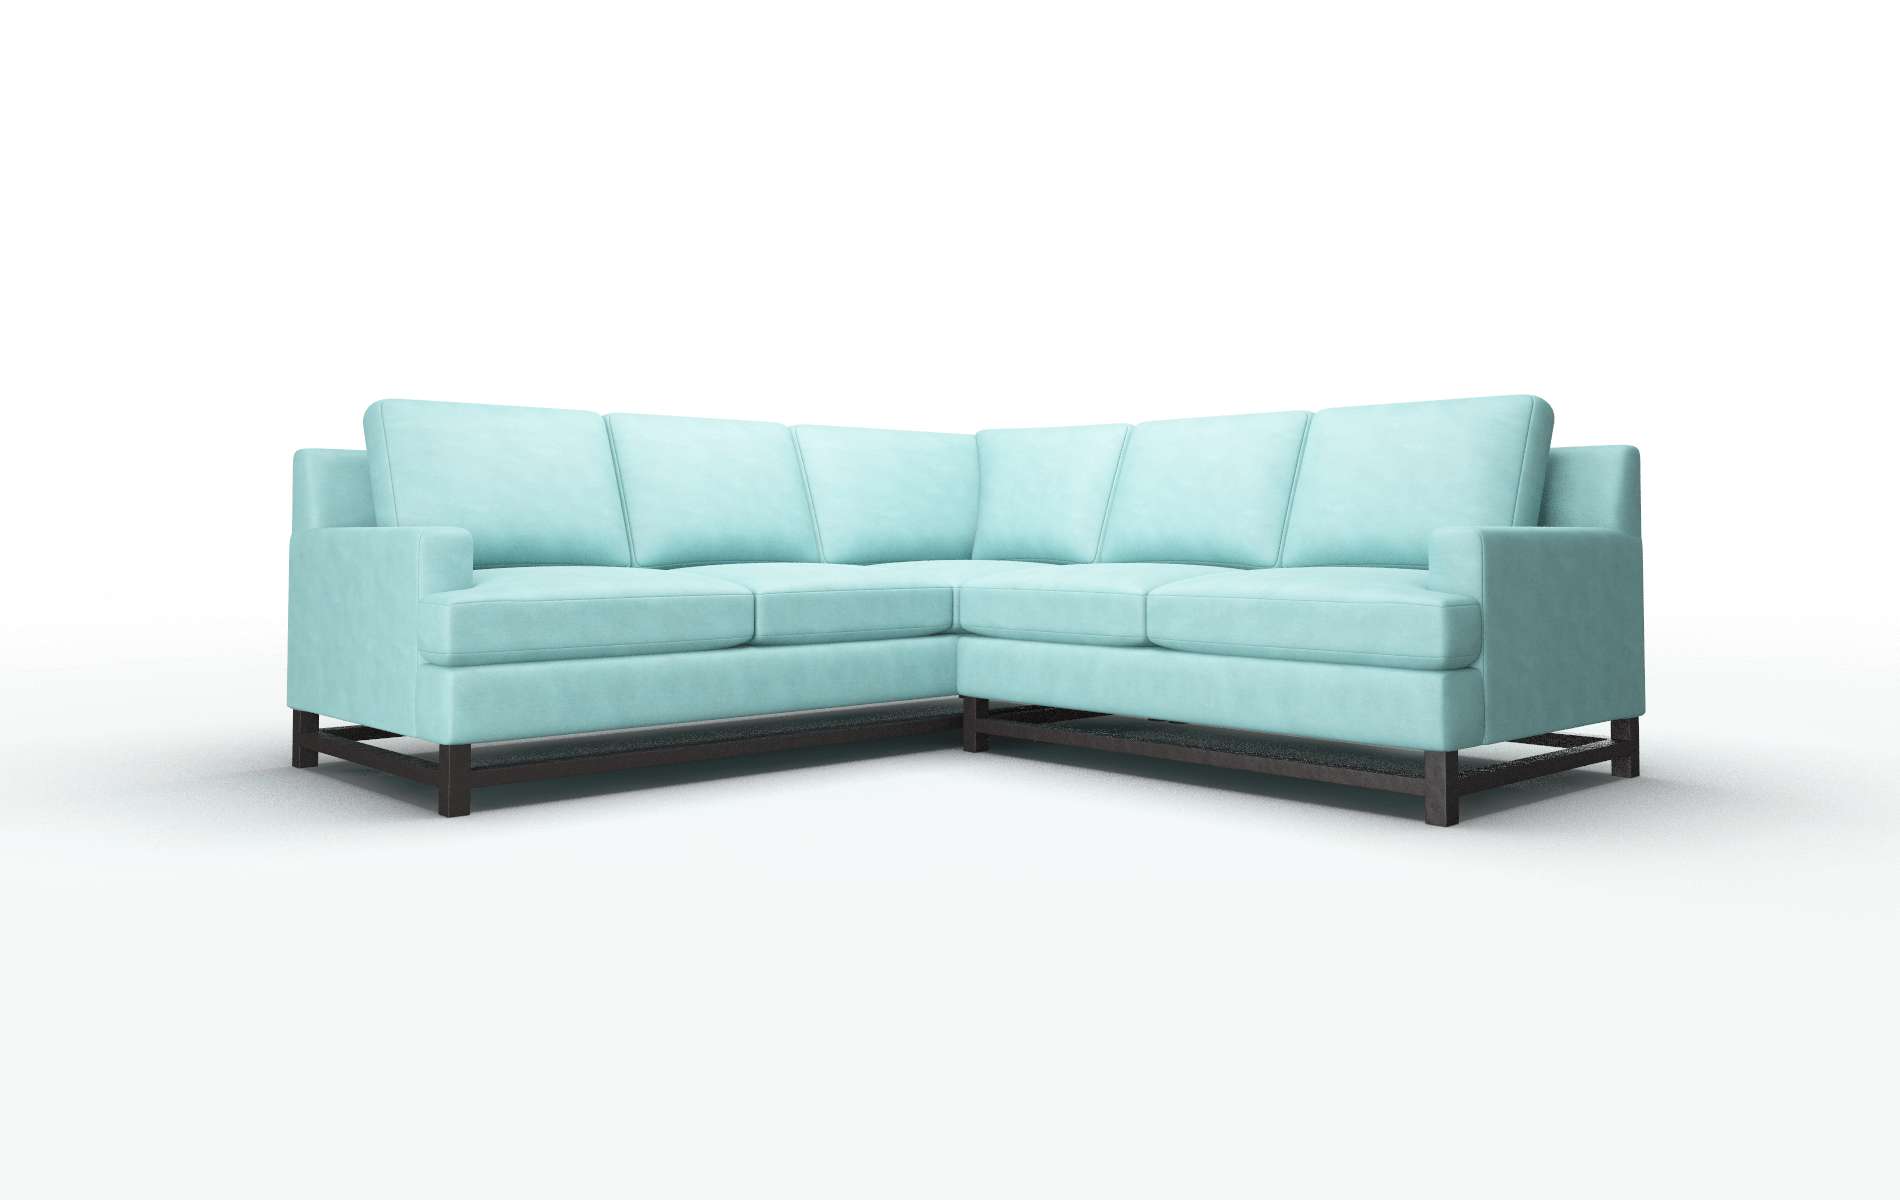 Houston Curious Turquoise Sectional espresso legs